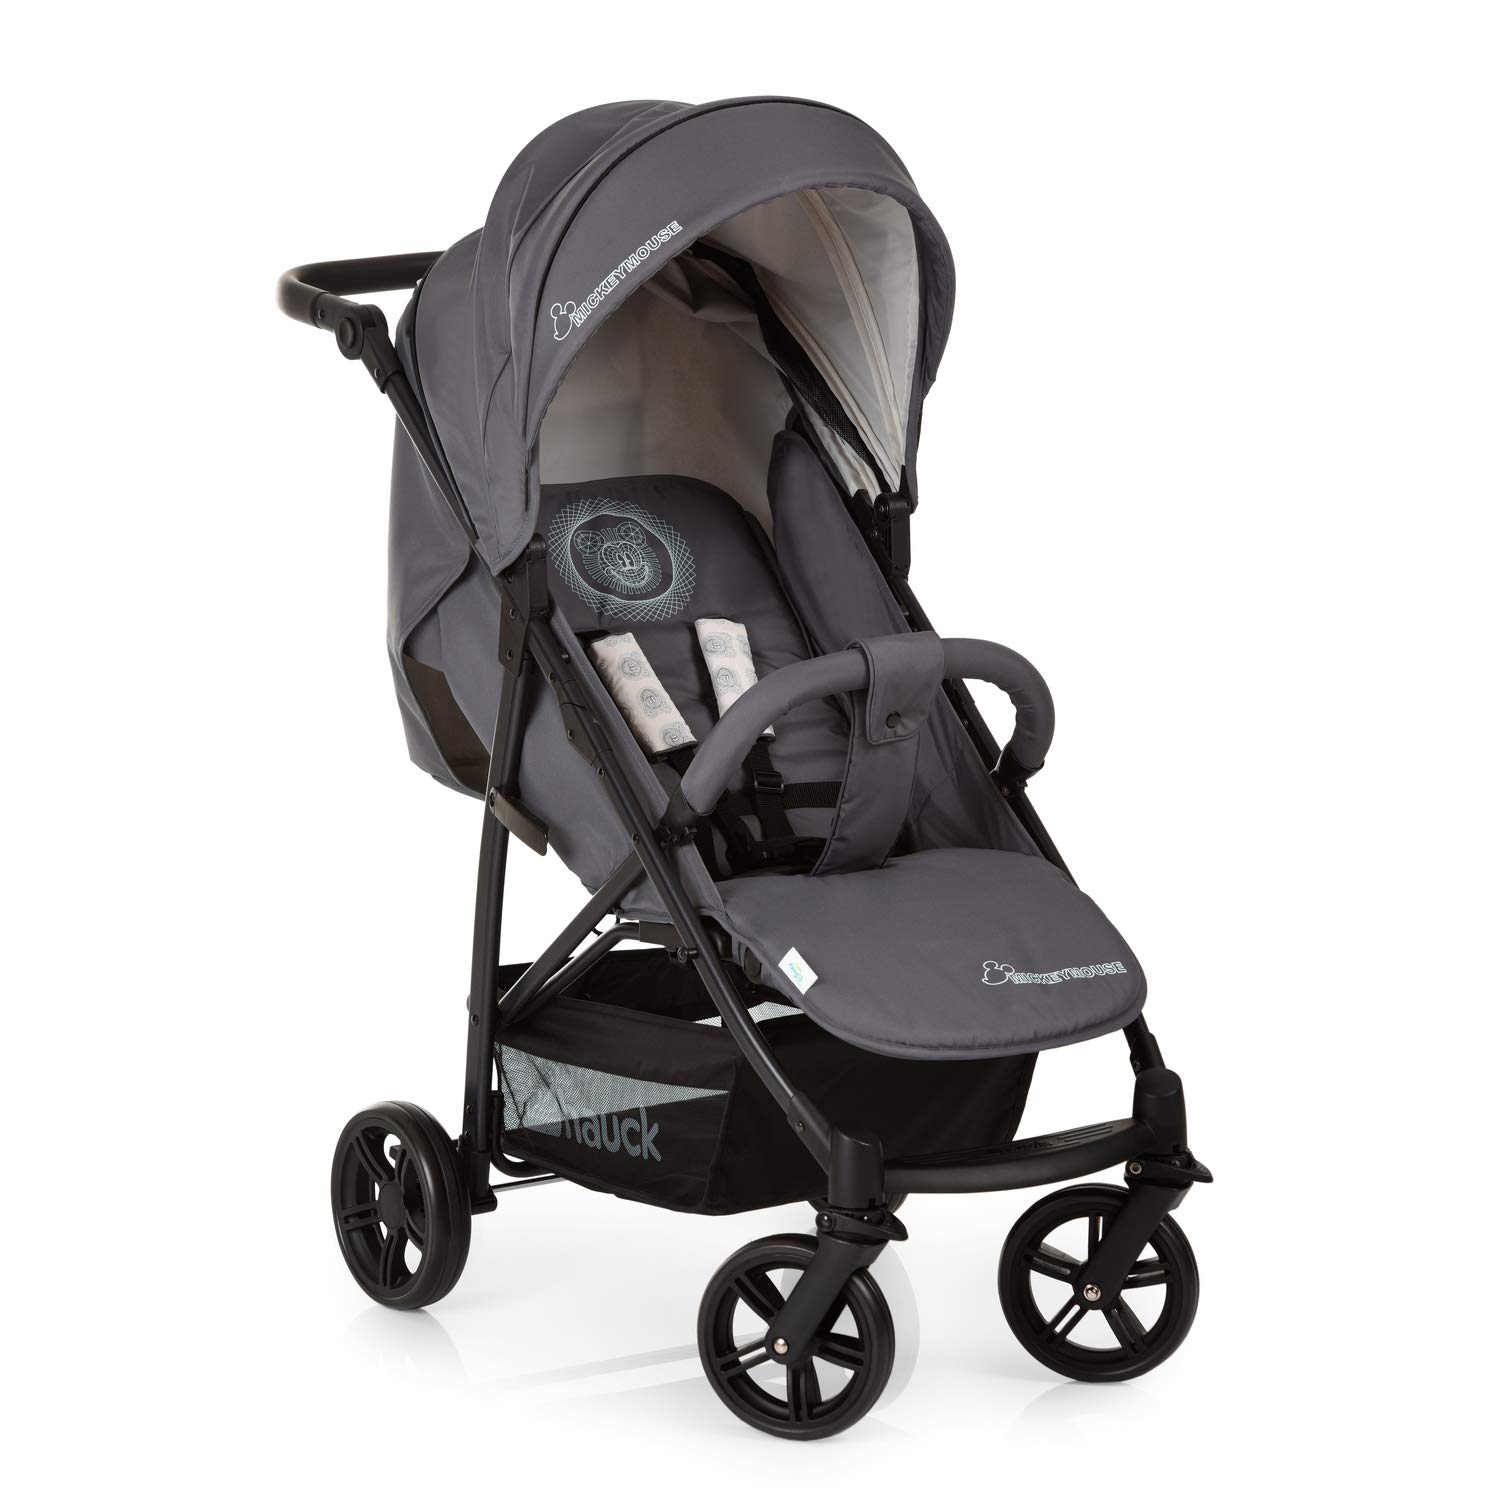 Hauck Rapid 4X or Rapid 4S Buggy with Reclining Function, Folds Down to a Small Size, for Children from Birth to 25 kg